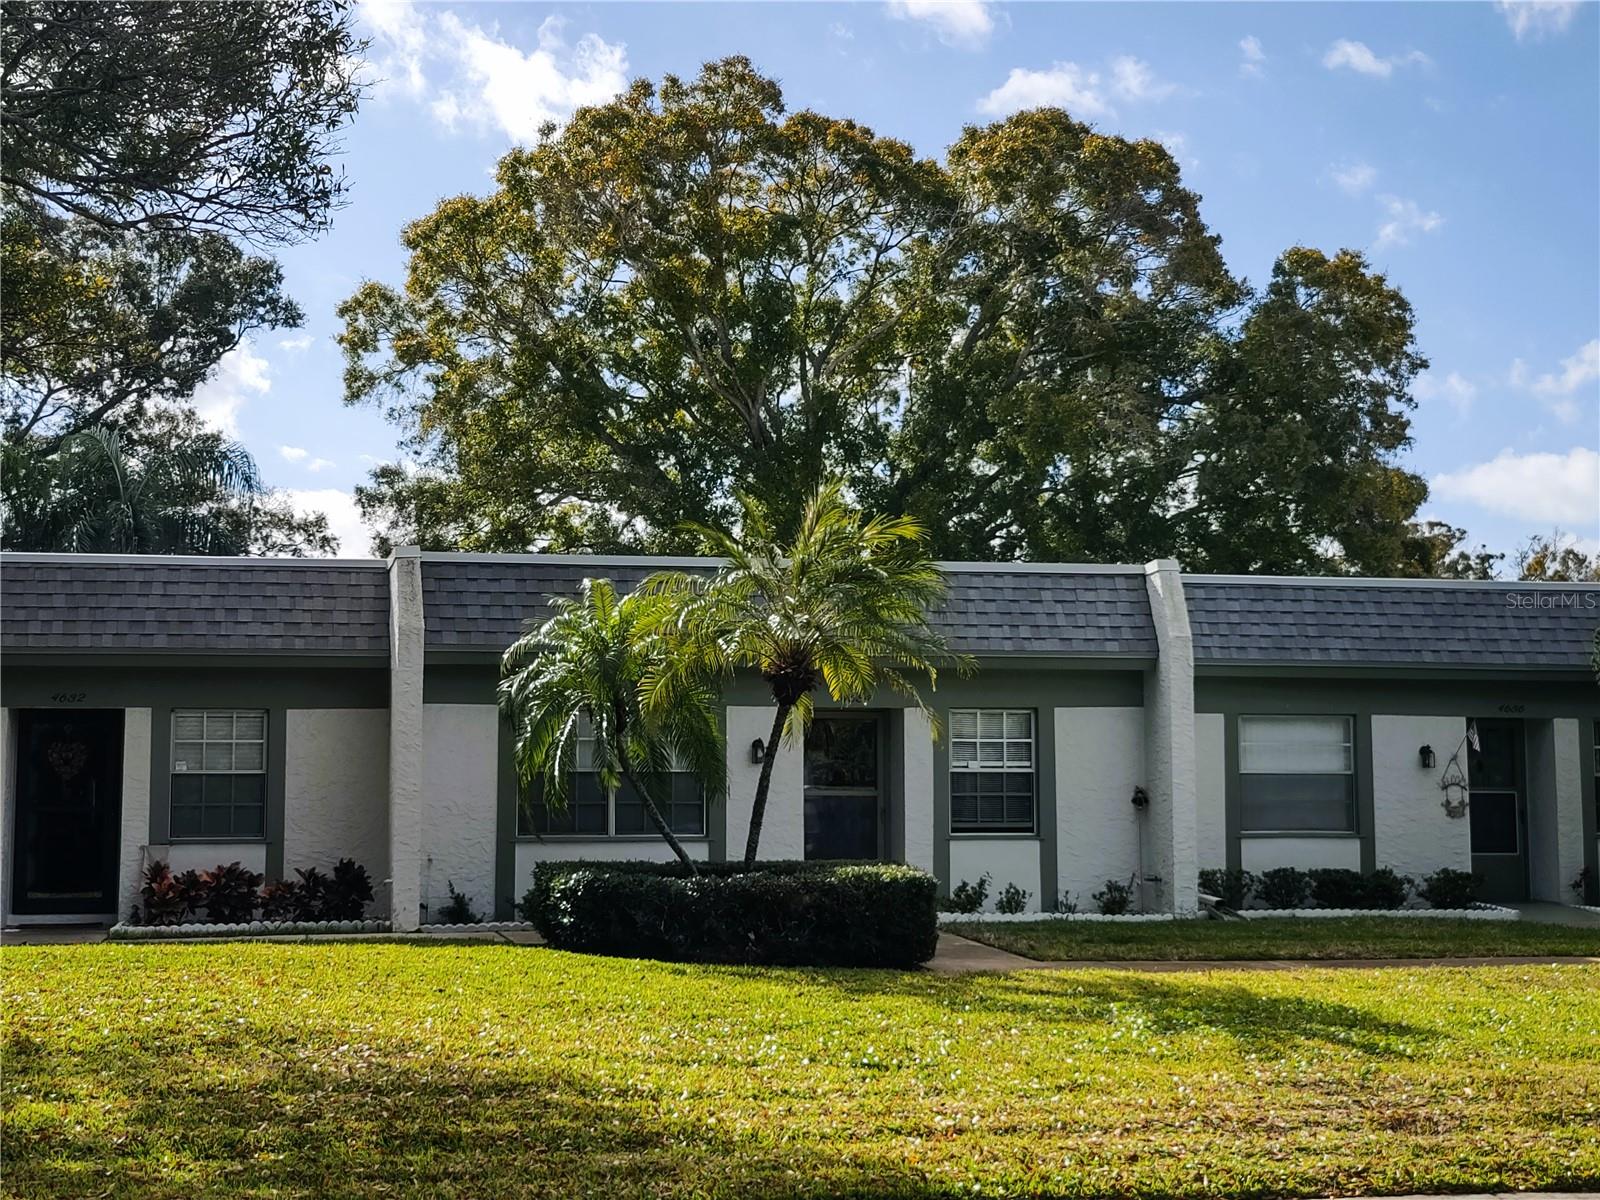 Centrally situated between St. Petersburg/Clearwater/Tampa and between the Gulf & the Bay...this home is a very desirable location. Convenient access to many attractions, entertainment, activities, venues, transportation, dining, shopping and awesome beaches. Don't miss out on this opportunity!